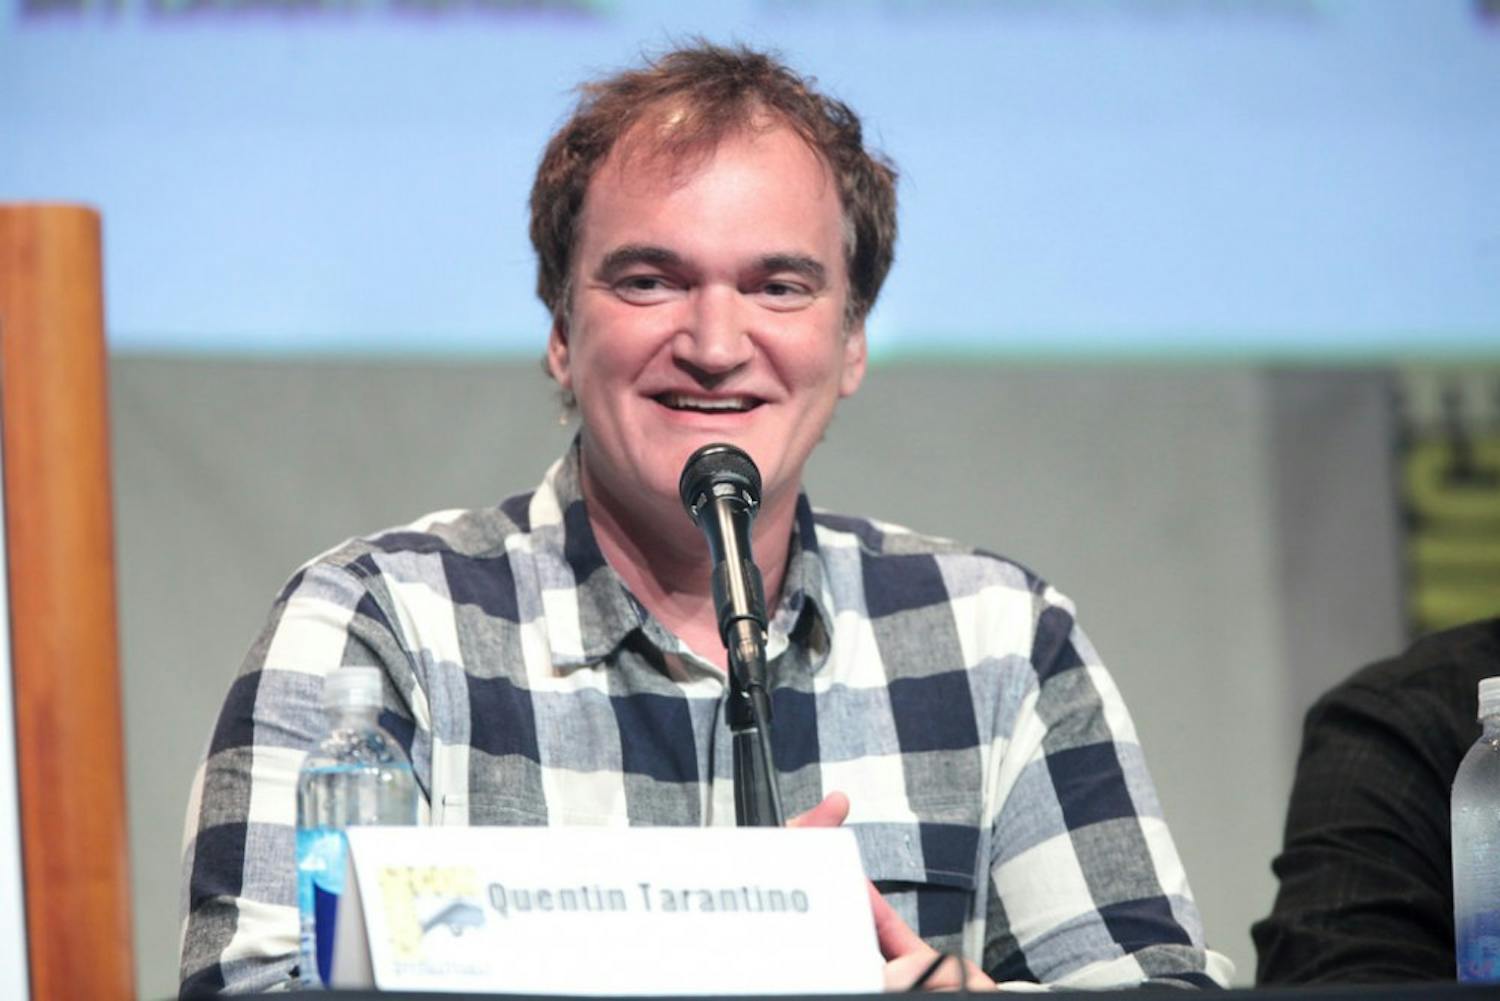 Quentin Tarantino (above) is one of a few active directors who remain loyal to&nbsp;35mm&nbsp;film despite the rise&nbsp;of digital production.